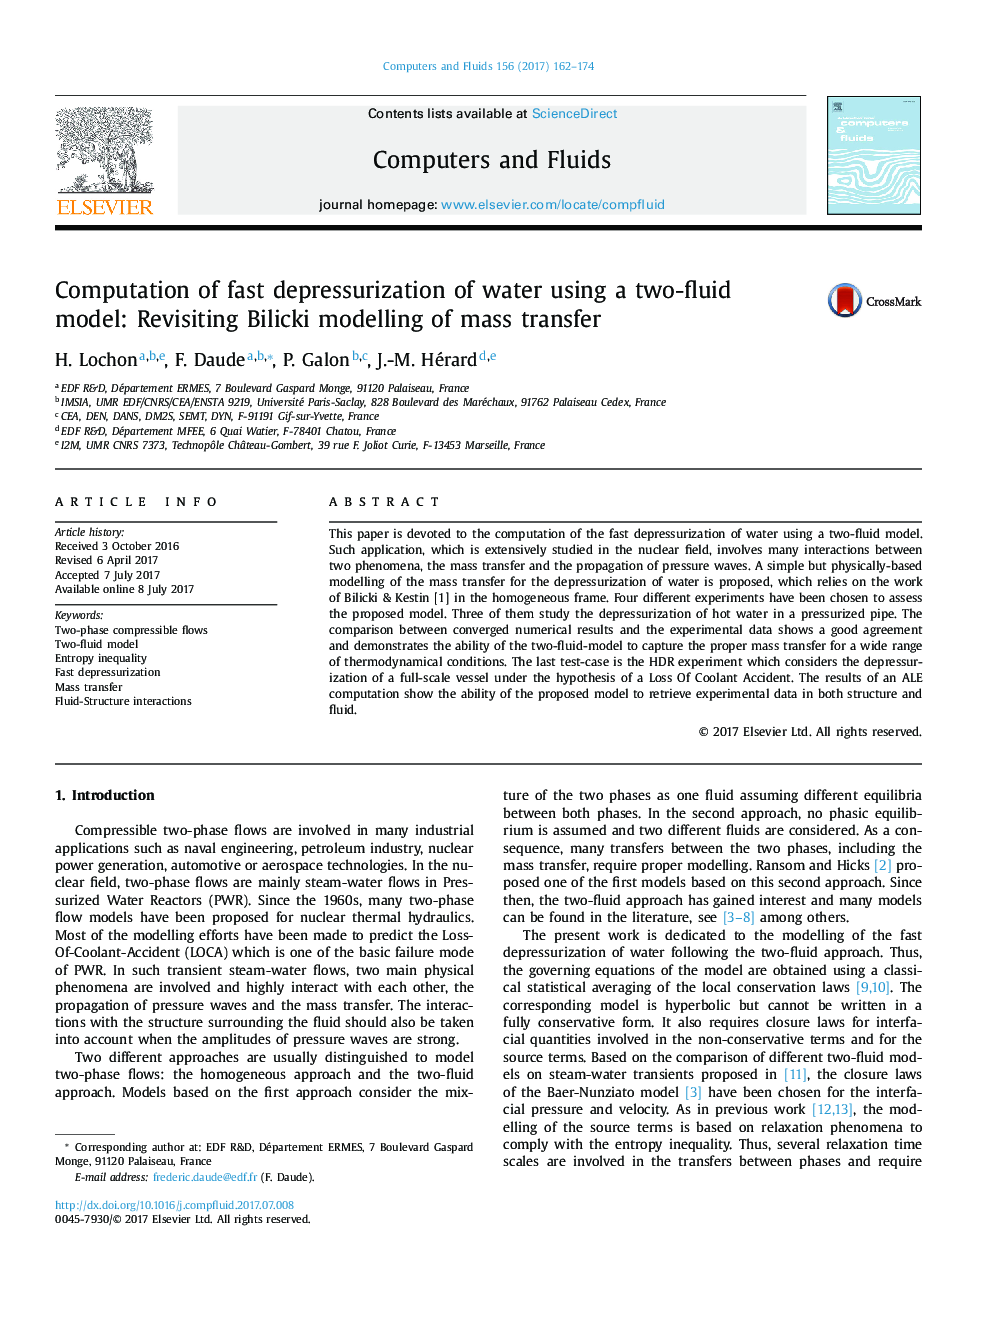 Computation of fast depressurization of water using a two-fluid model: Revisiting Bilicki modelling of mass transfer